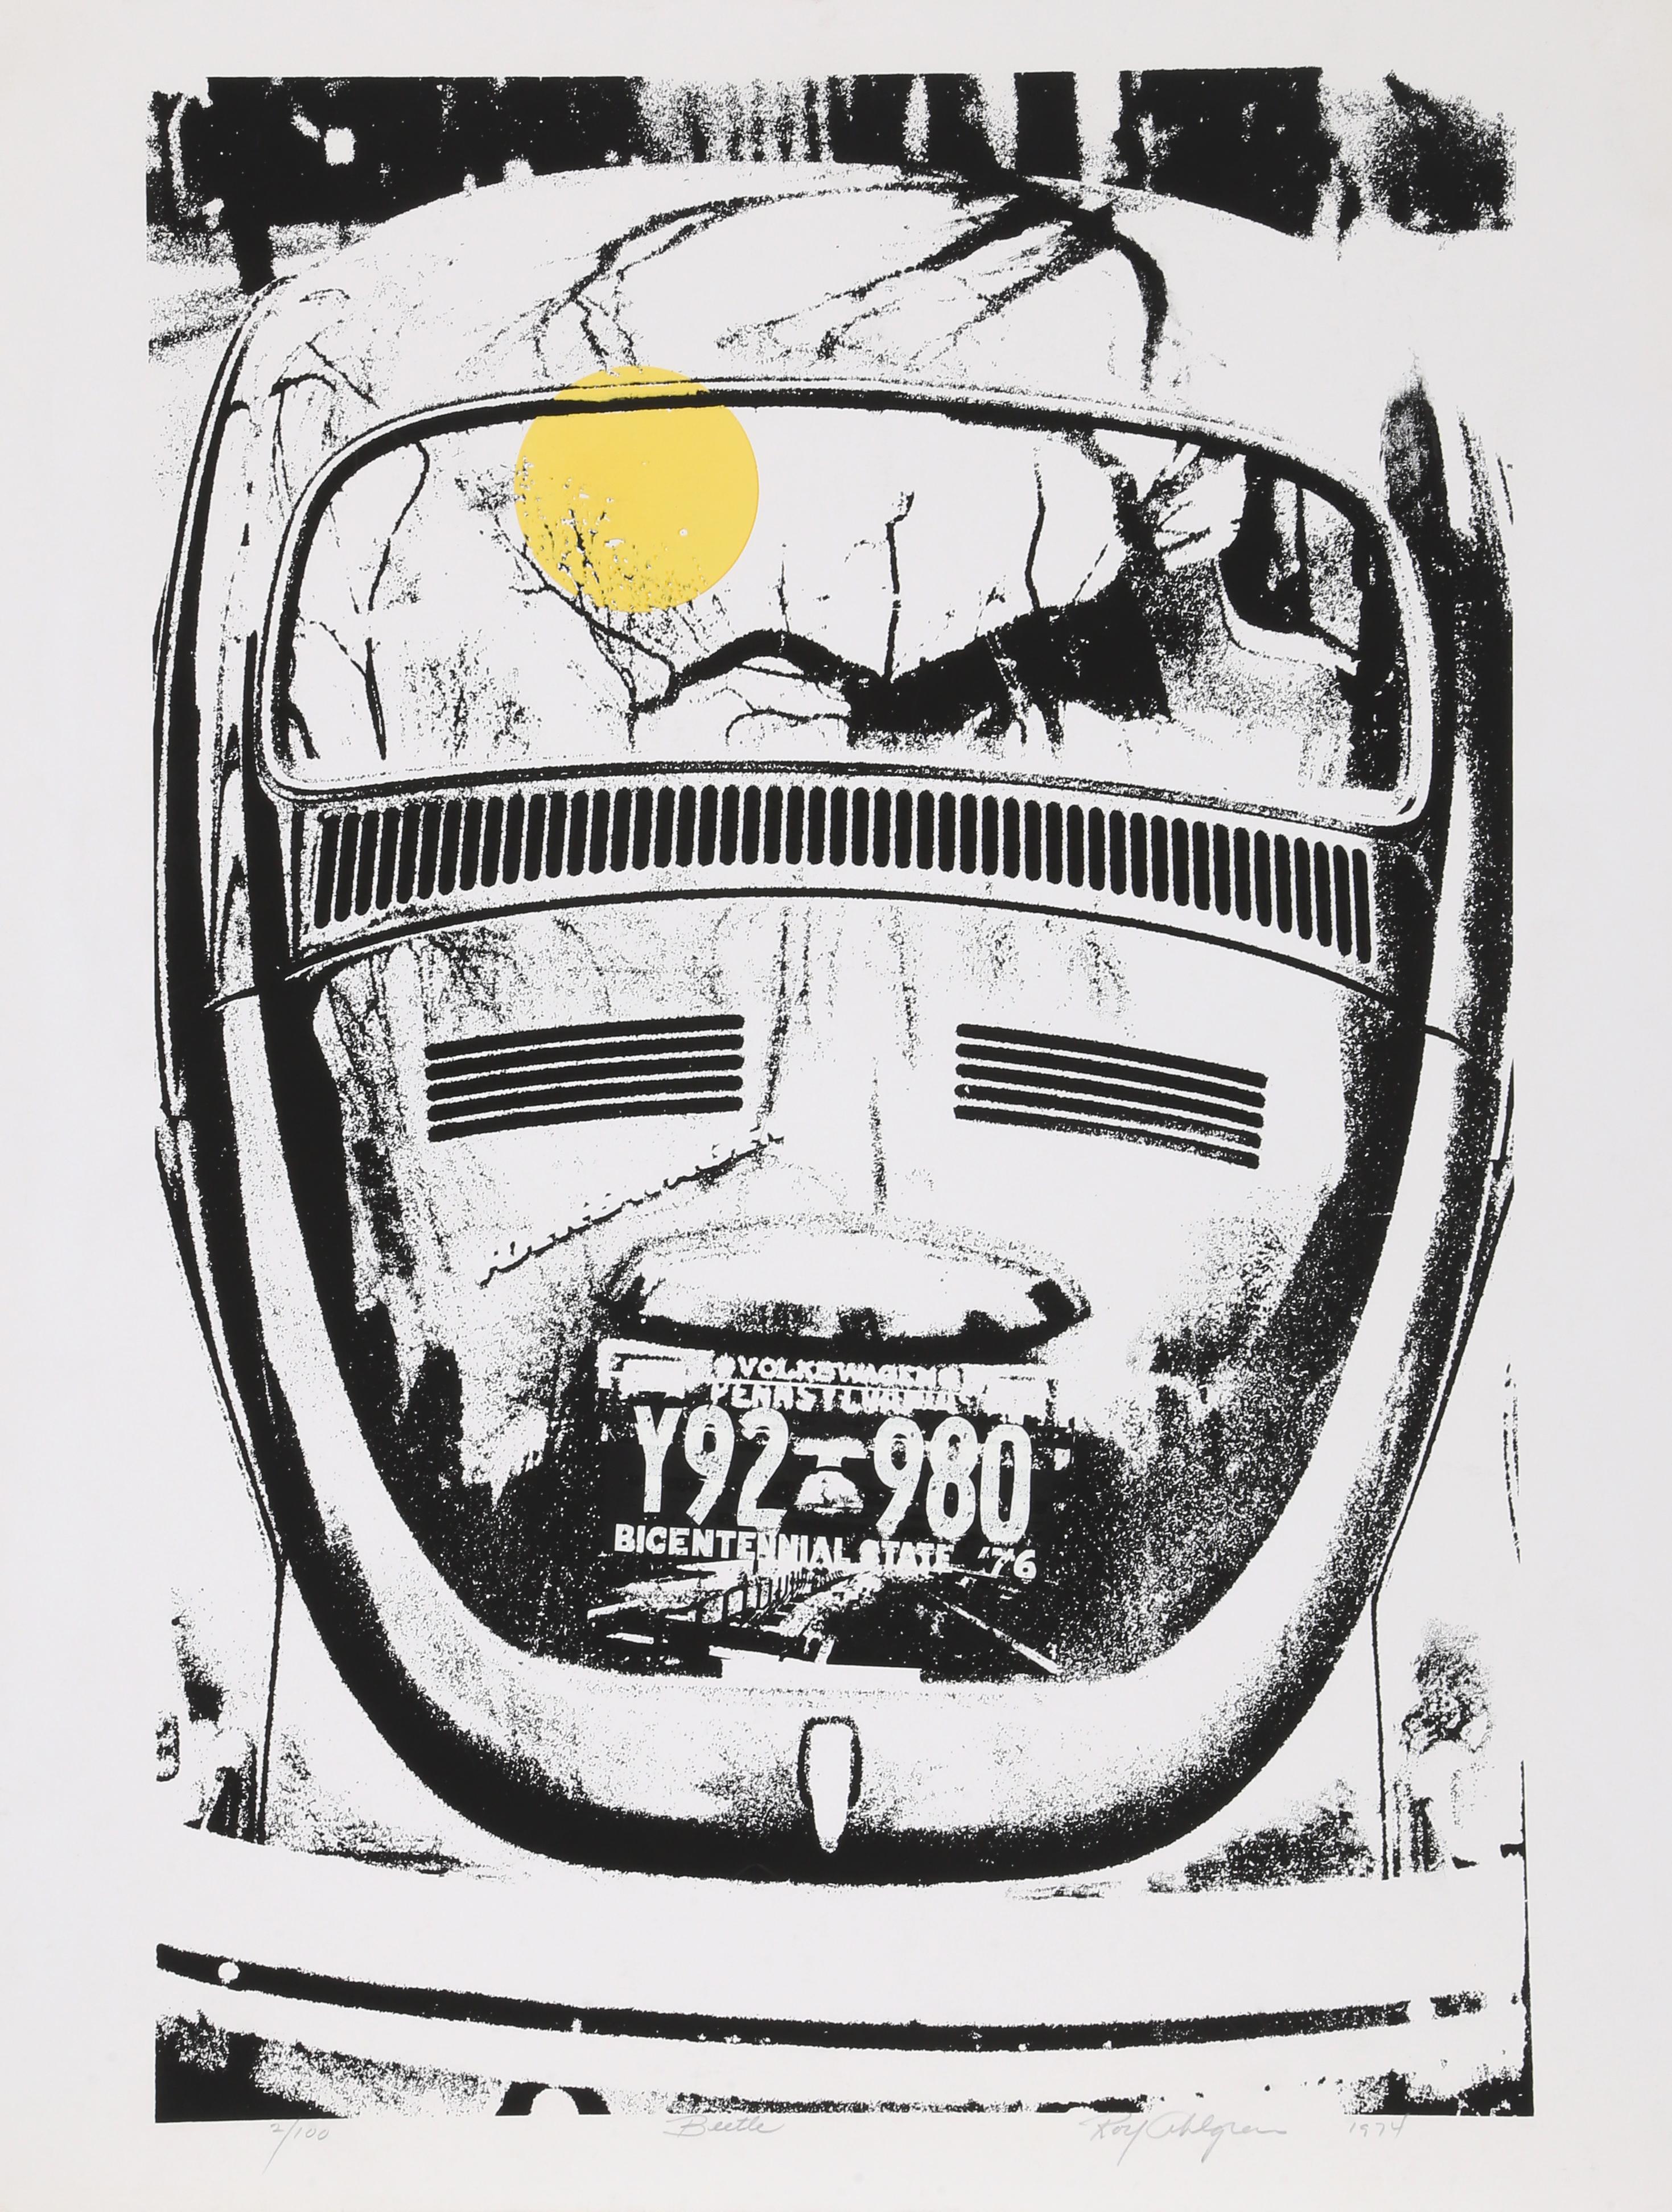 Artist: Roy Ahlgren, American (1927 - 2011)
Title: Beetle
Year: 1974
Medium: Silkscreen, signed and numbered in pencil
Edition: 2/100
Image Size: 24 x 16 inches
Size: 26 x 20 inches